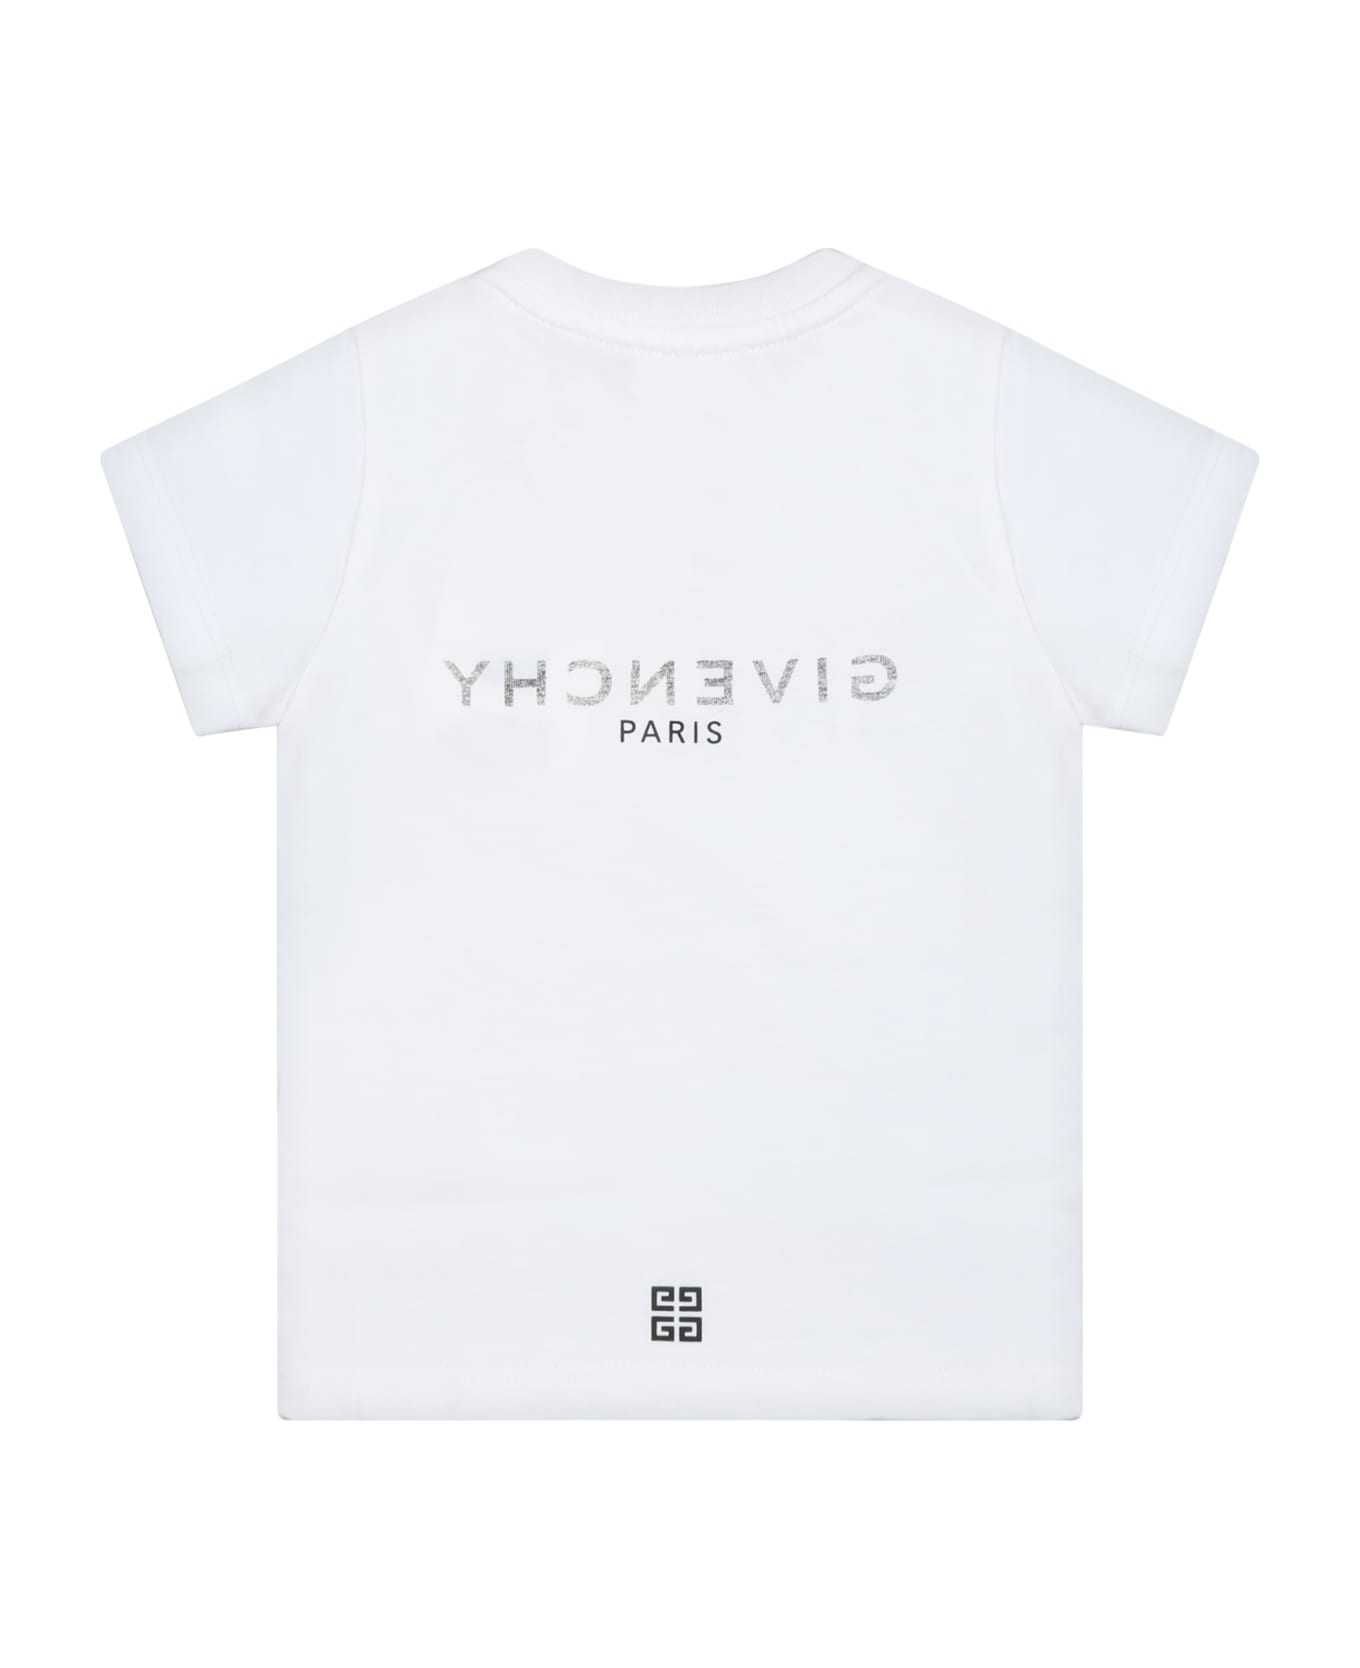 Givenchy White T-shirt For Babykids With Black Logo - White